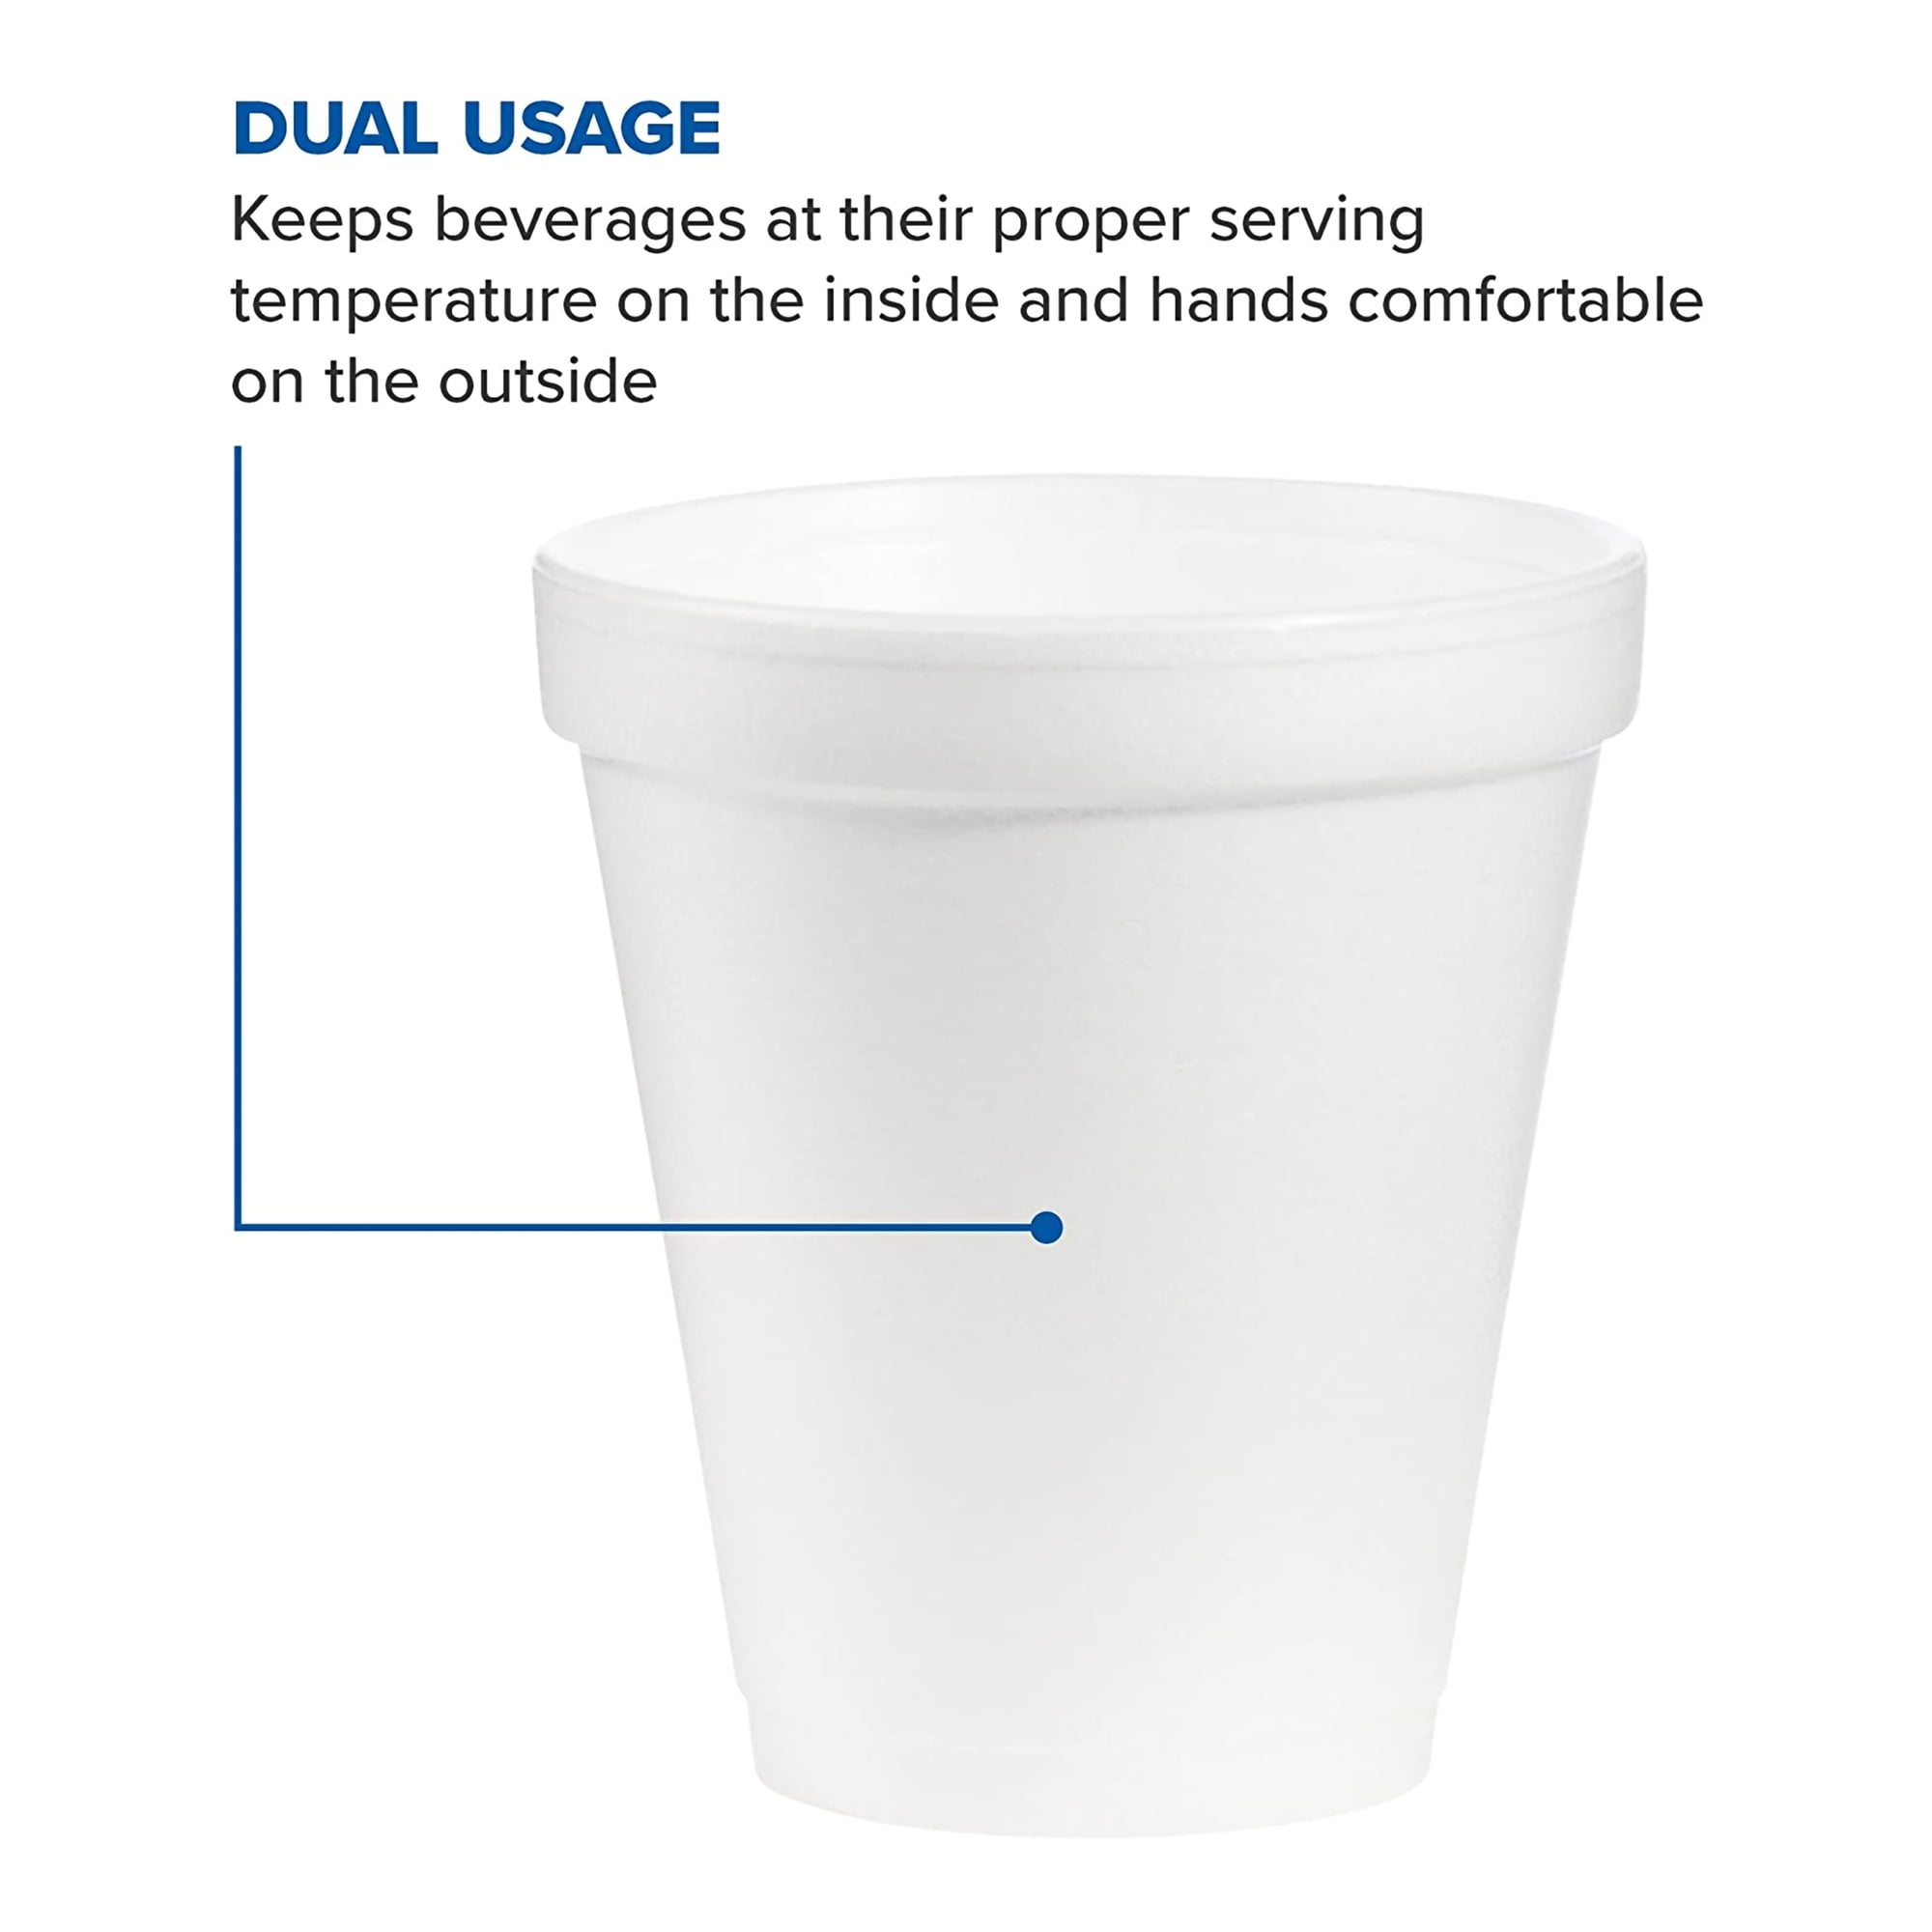 WinCup Disposable Drinking Cup White Styrofoam 12 oz. 1000 Ct 12C18 